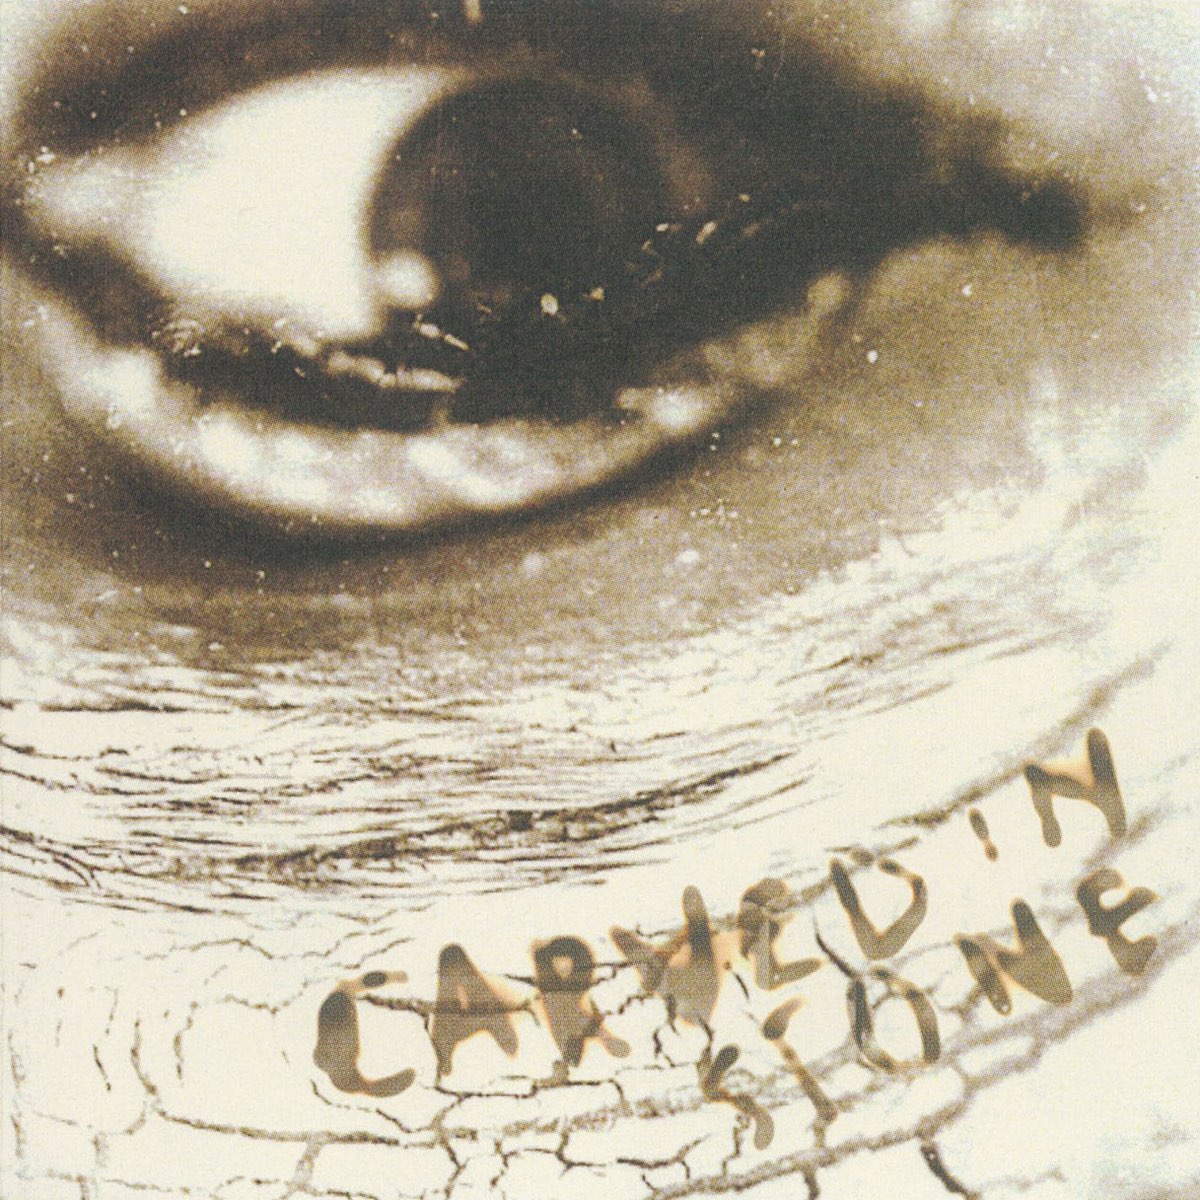 Carved in stone. Vince Neil Carved in Stone. Carved in Stone, 1995. Vince Neil - Carved in Stone (WPCR-1176, Japan).